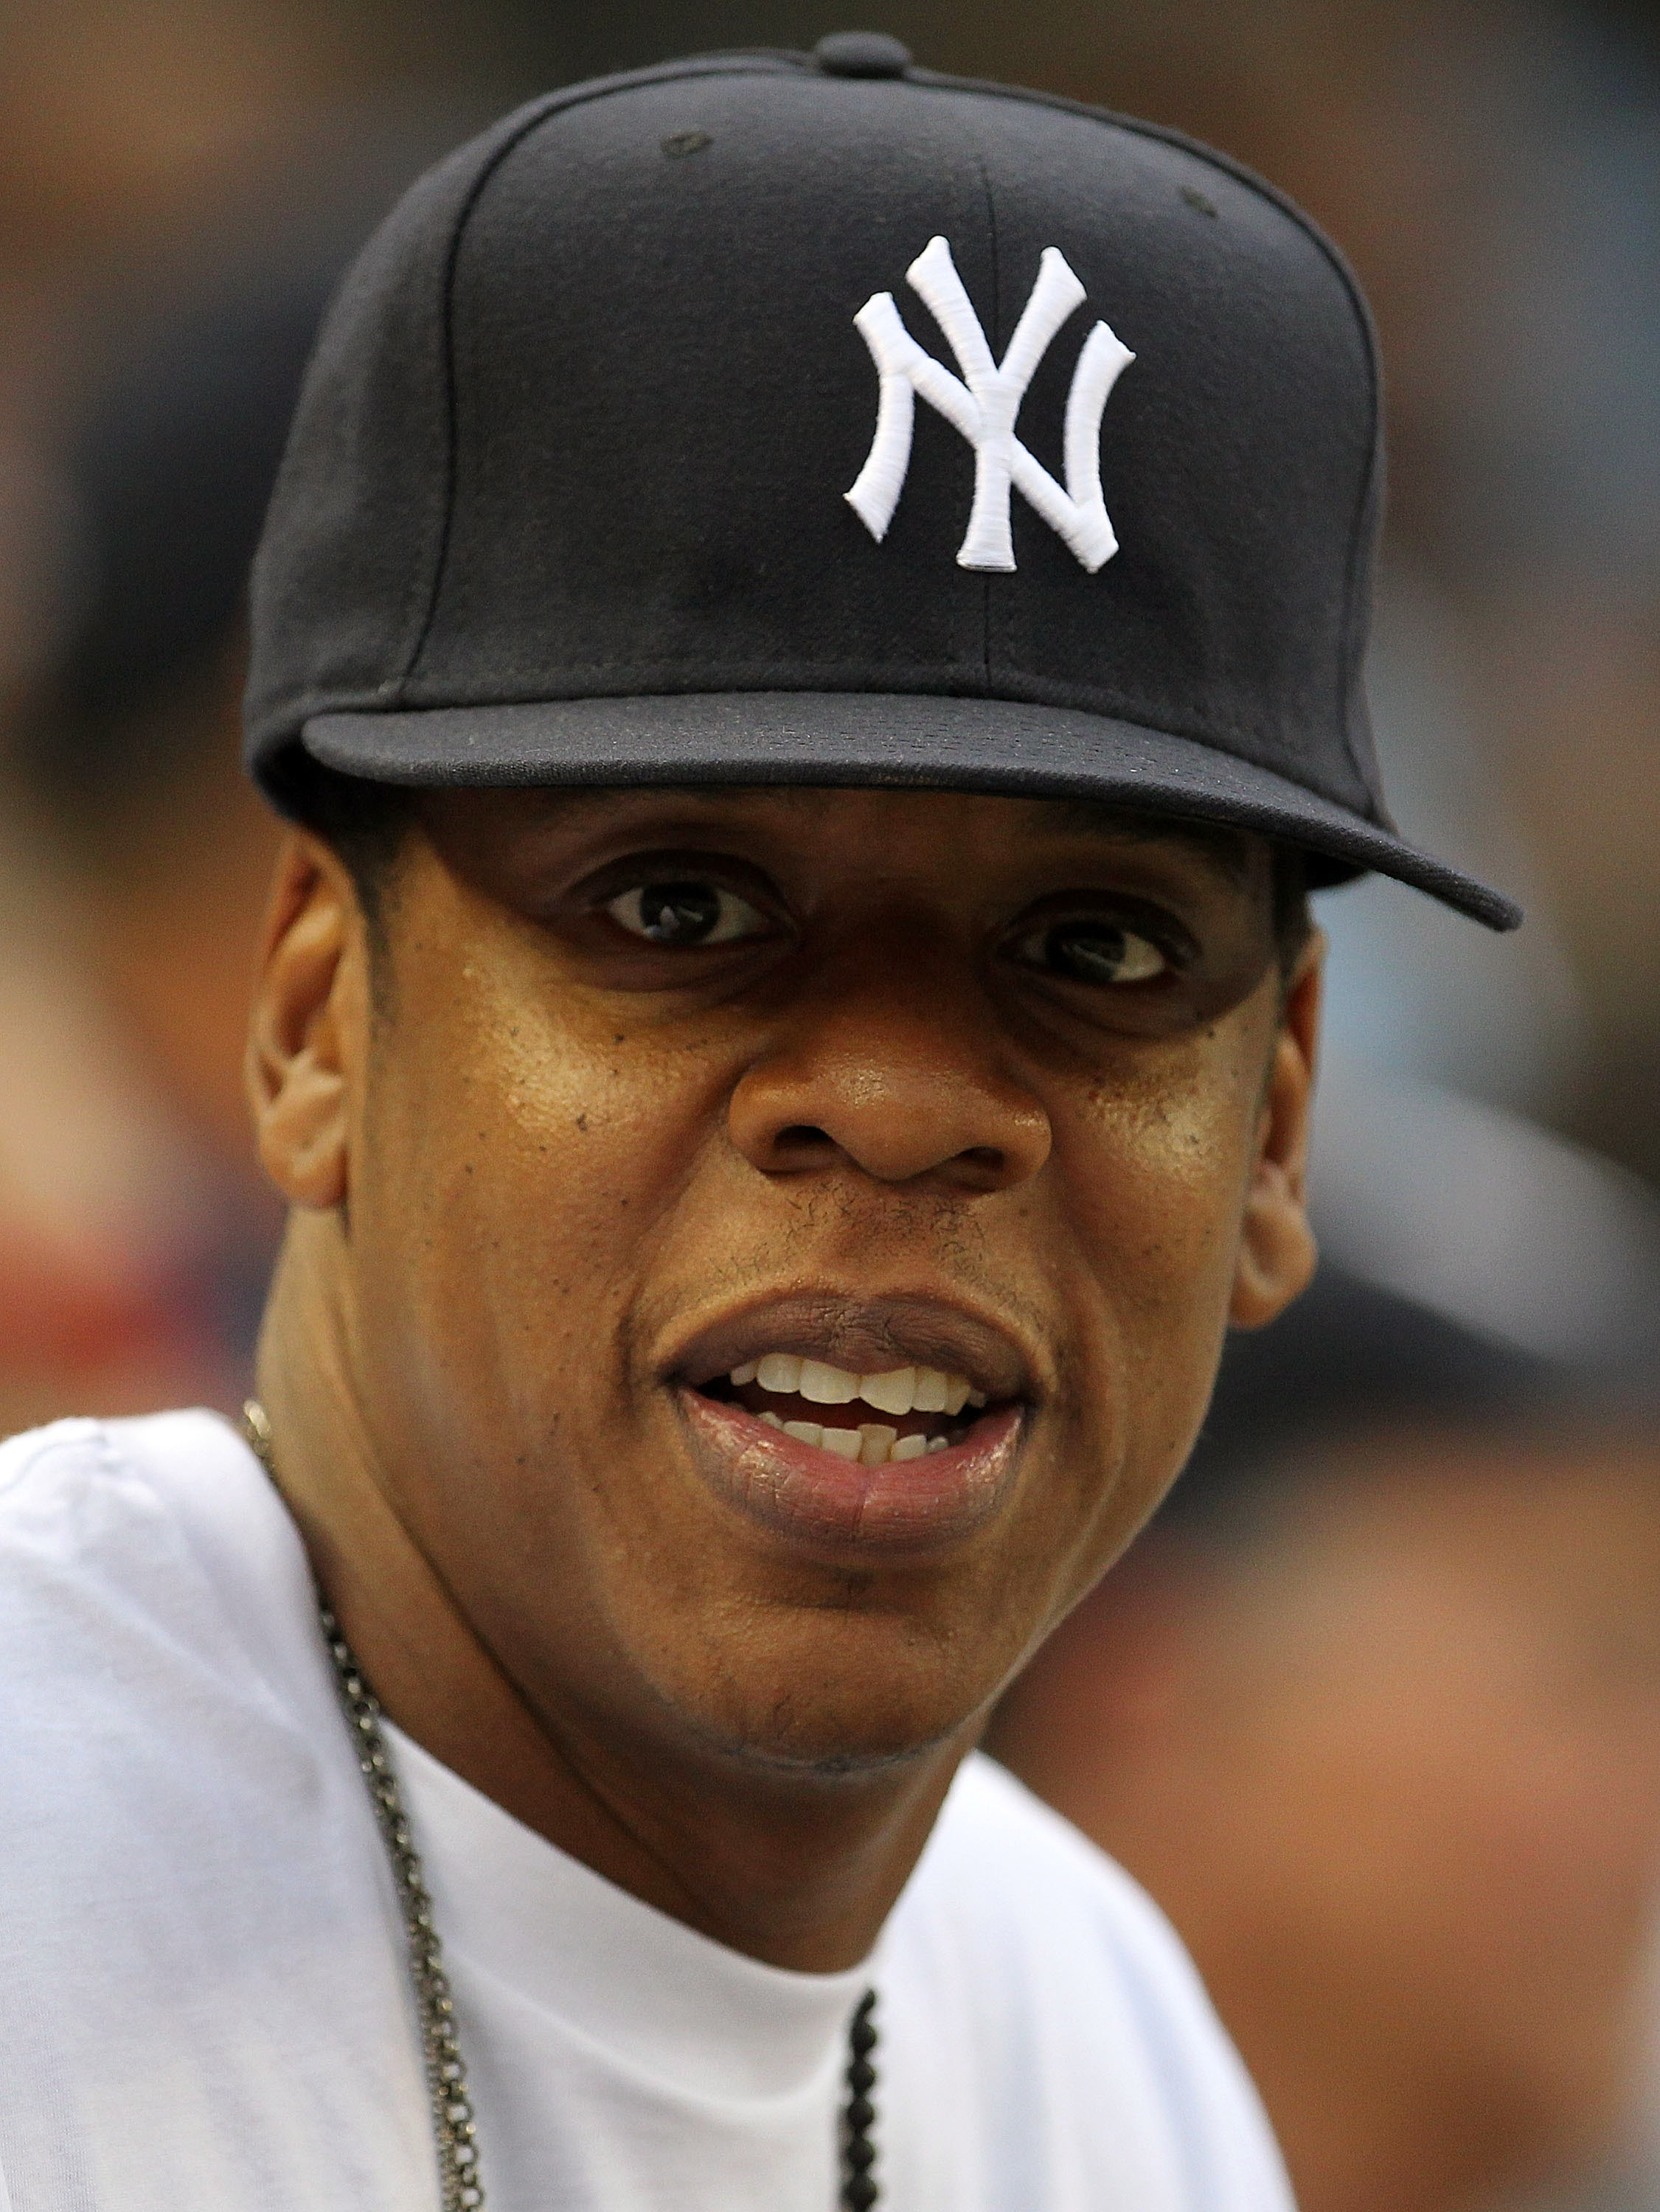 NEW YORK - JULY 23:  Rapper Jay-Z watches the game between the New York Yankees and the Kansas City Royals on July 23, 2010 at Yankee Stadium in the Bronx borough of New York City.  (Photo by Al Bello/Getty Images)